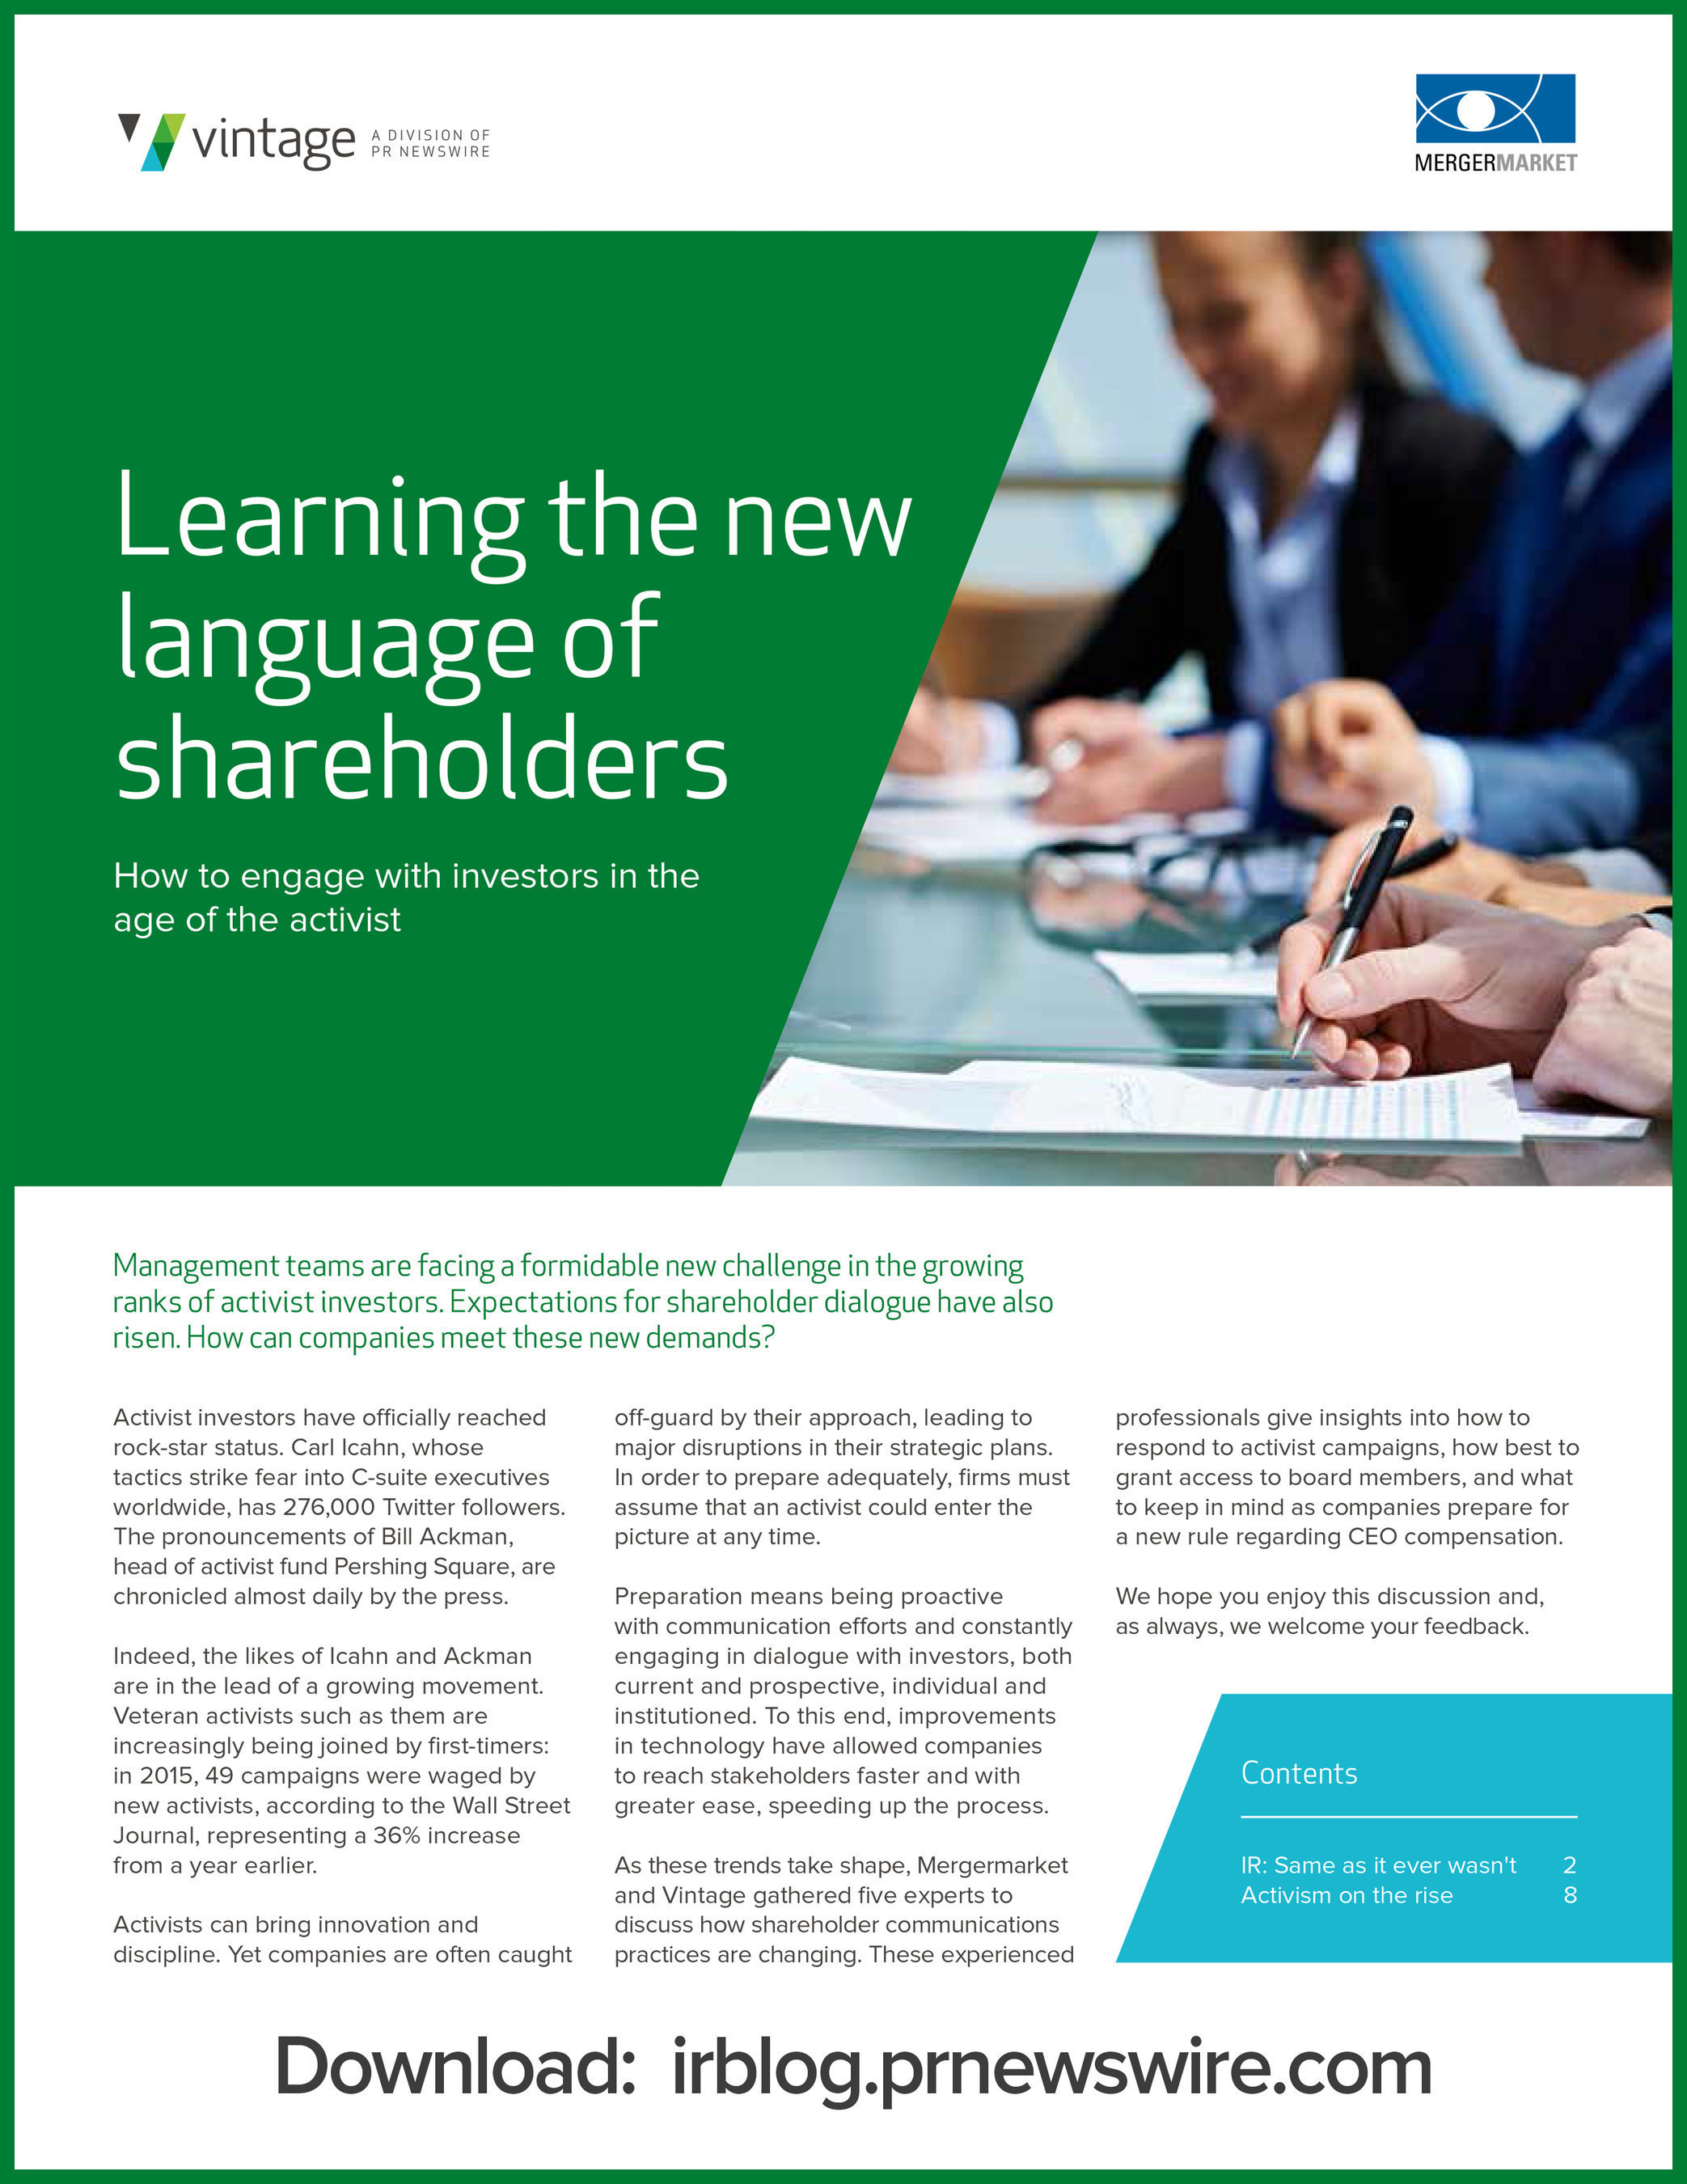 WHITEPAPER DOWNLOAD: Management teams are facing a formidable new challenge in the growing ranks of activist investors. Expectations for shareholder dialogue have also risen. How can companies meet these new demands? Mergermarket and Vintage gathered five experts to discuss how shareholder communications practices are changing. These experienced professionals give insights into how to respond to activist campaigns, how best to grant access to board members, and what to keep in mind as companies prepare for a new rule regarding CEO compensation.